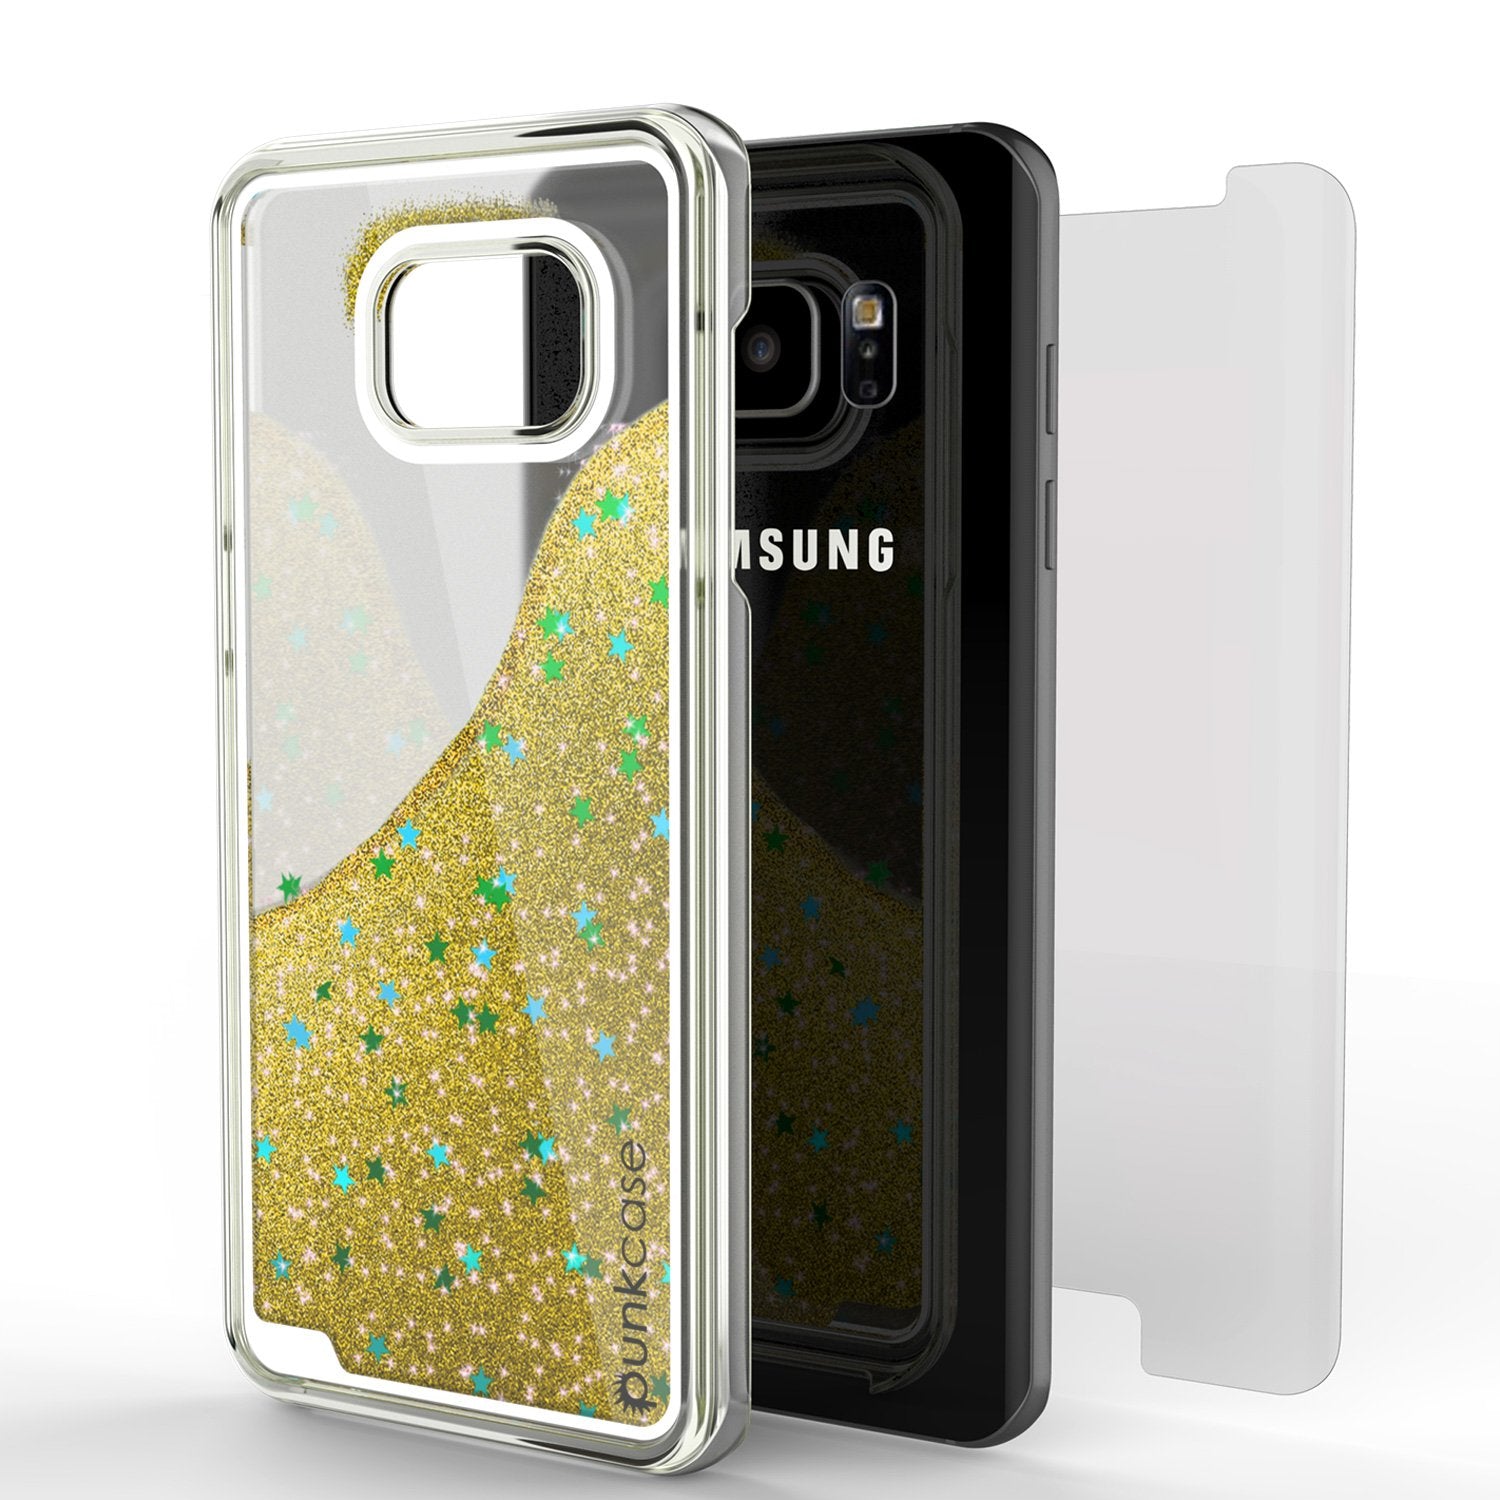 S7 Edge Case, Punkcase [Liquid GOLD Series] Protective Dual Layer Floating Glitter Cover with lots of Bling & Sparkle + PunkShield Screen Protector